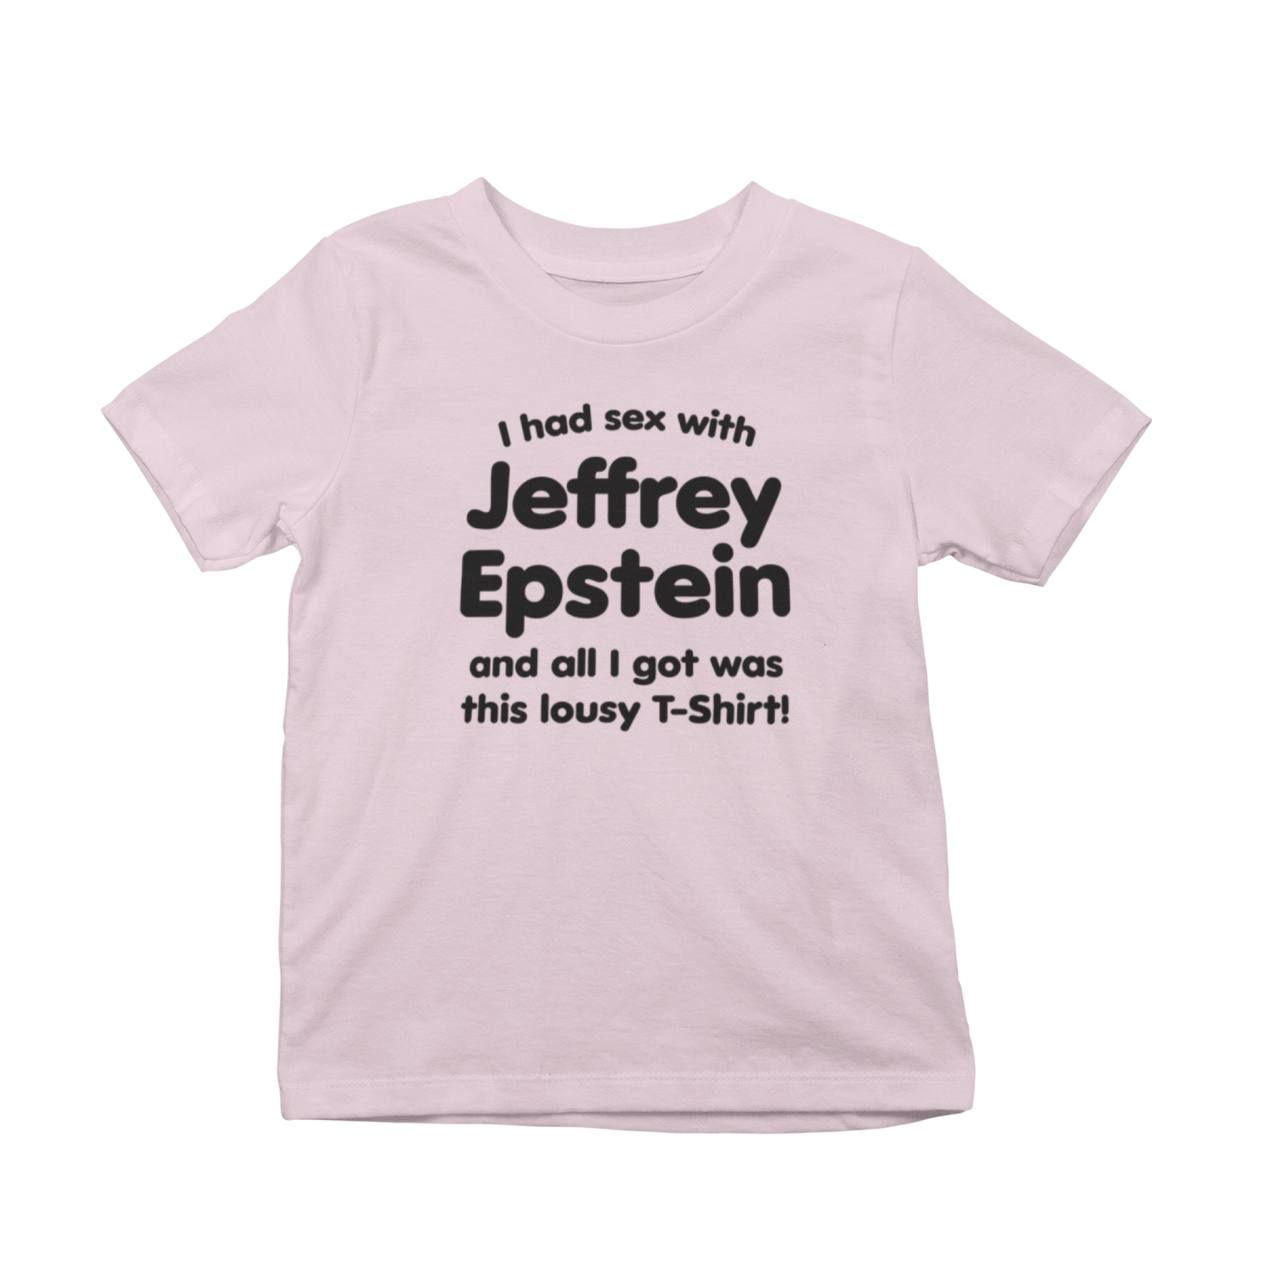 I Had Sex With Jeffery Epstein And All I Got Was This Lousy T-Shirt!